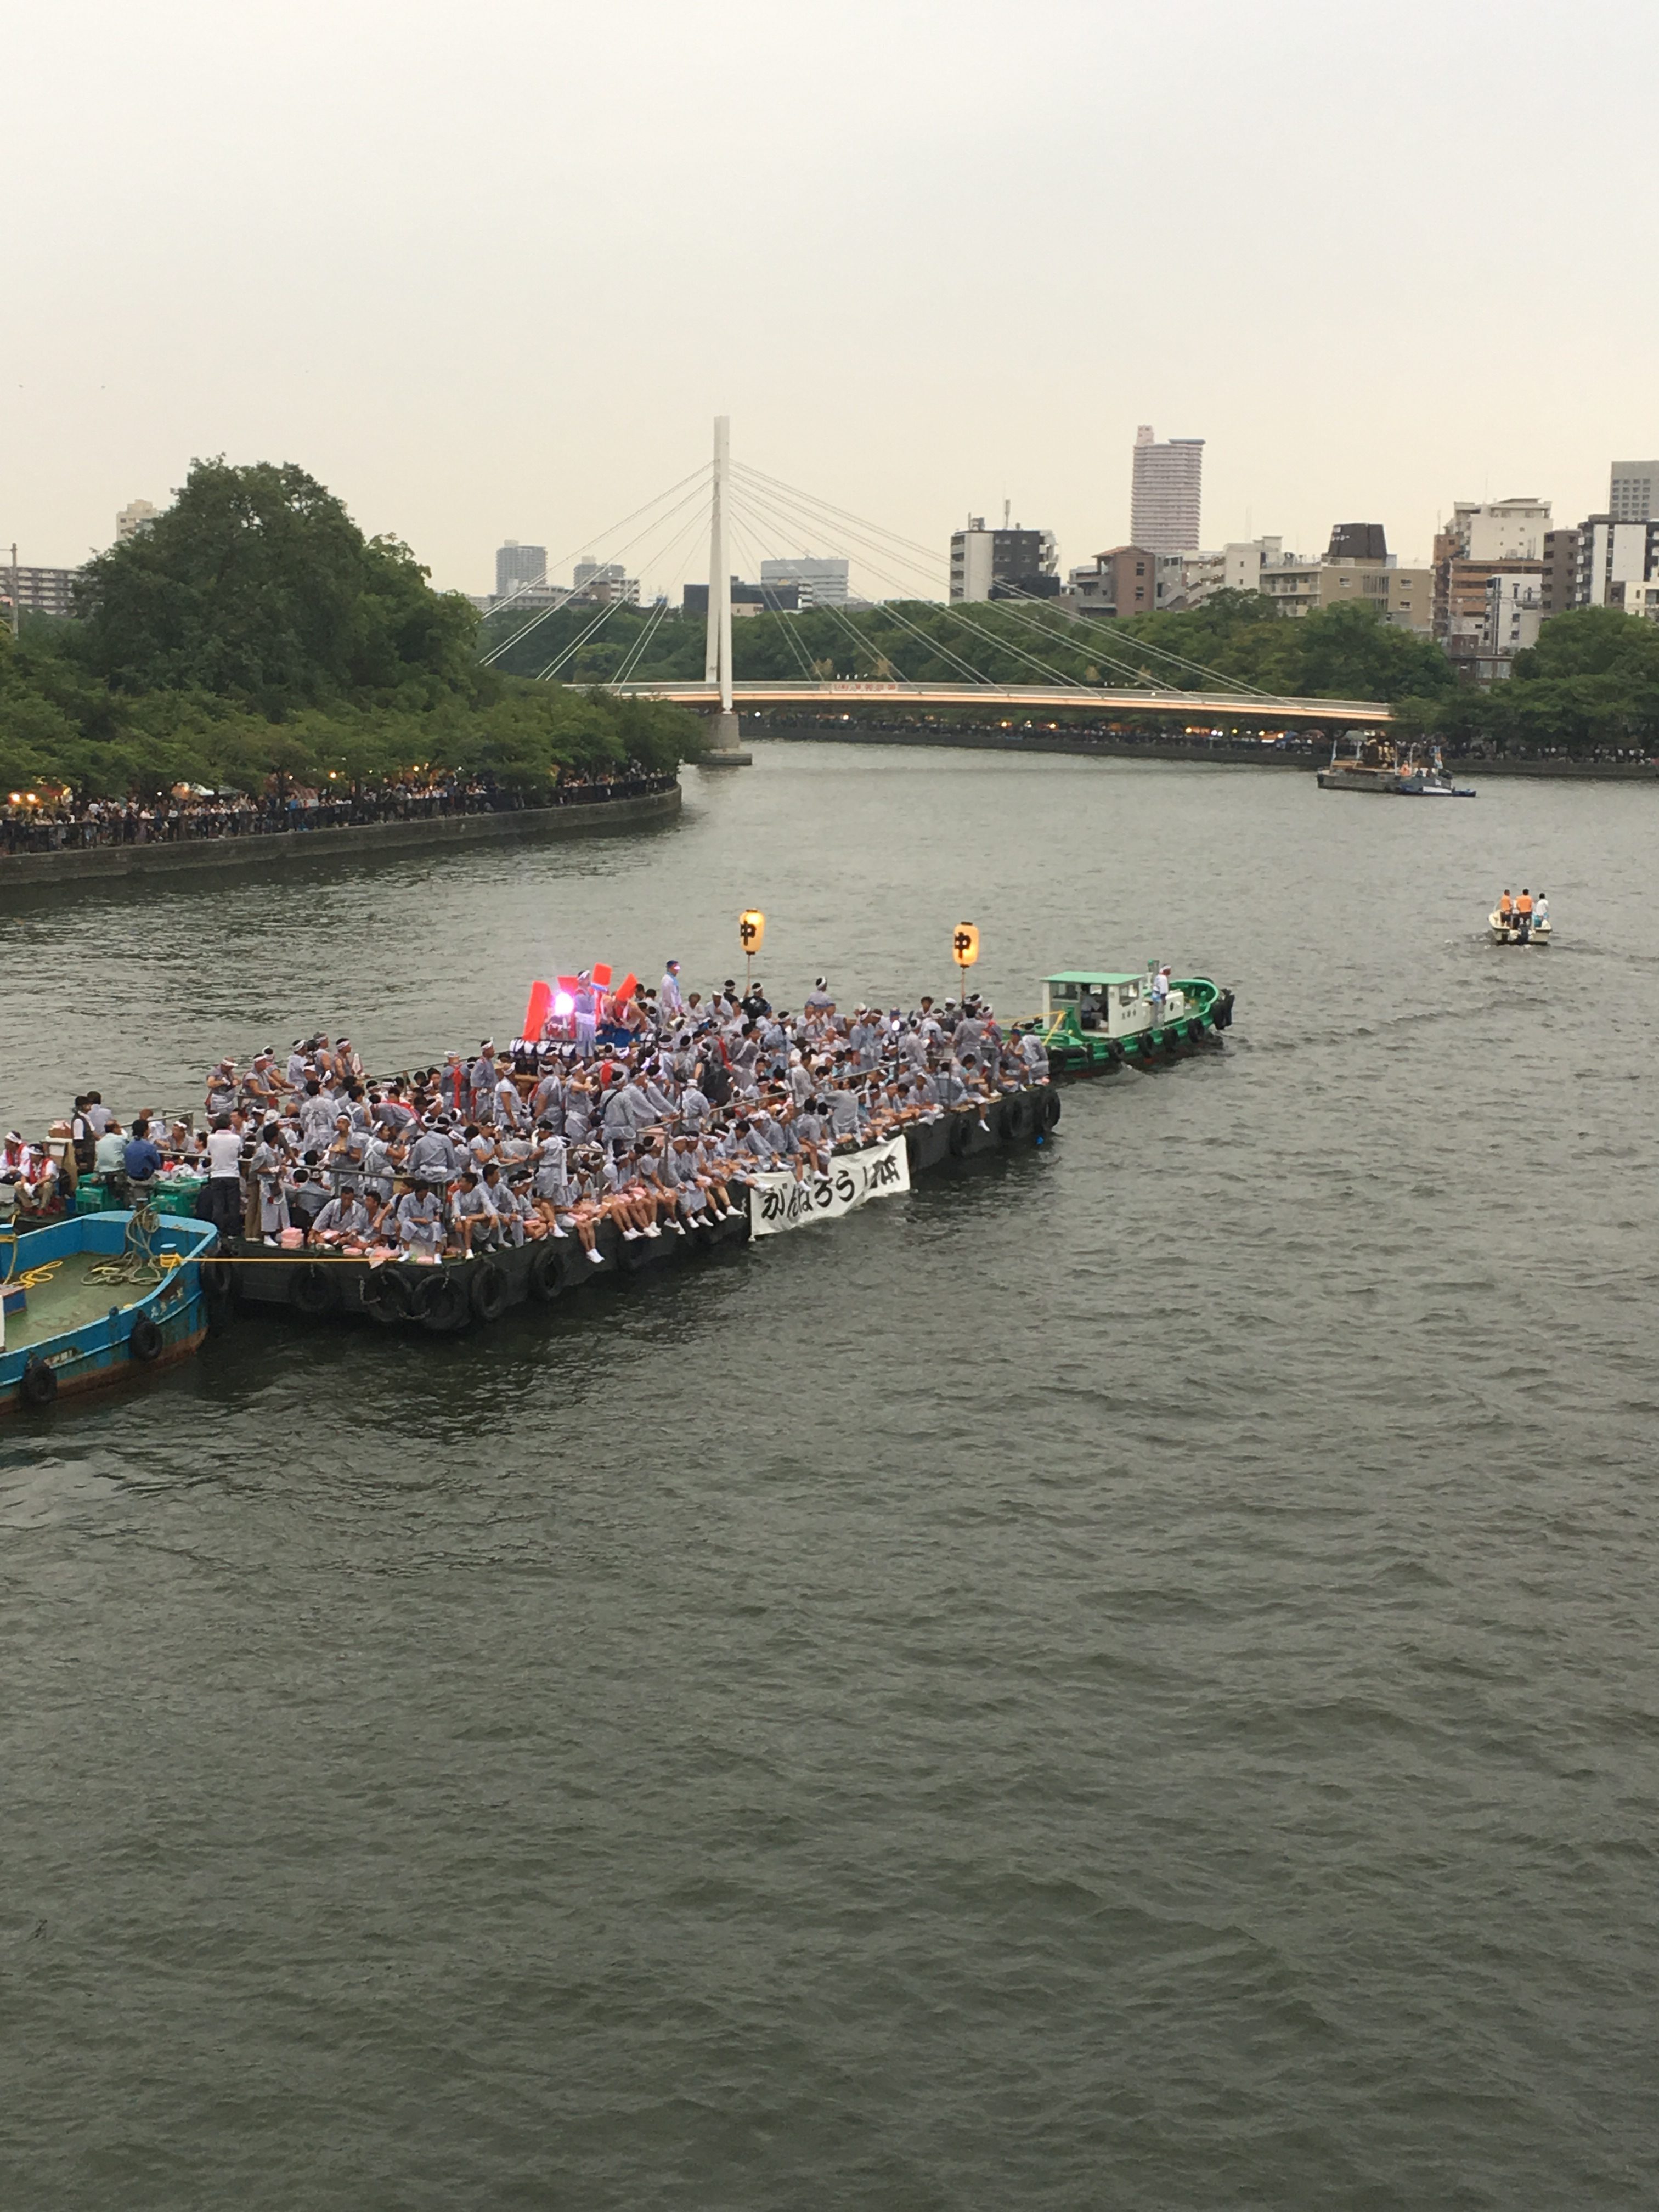 small tug boat carrying people down the river during tenjin matsuri